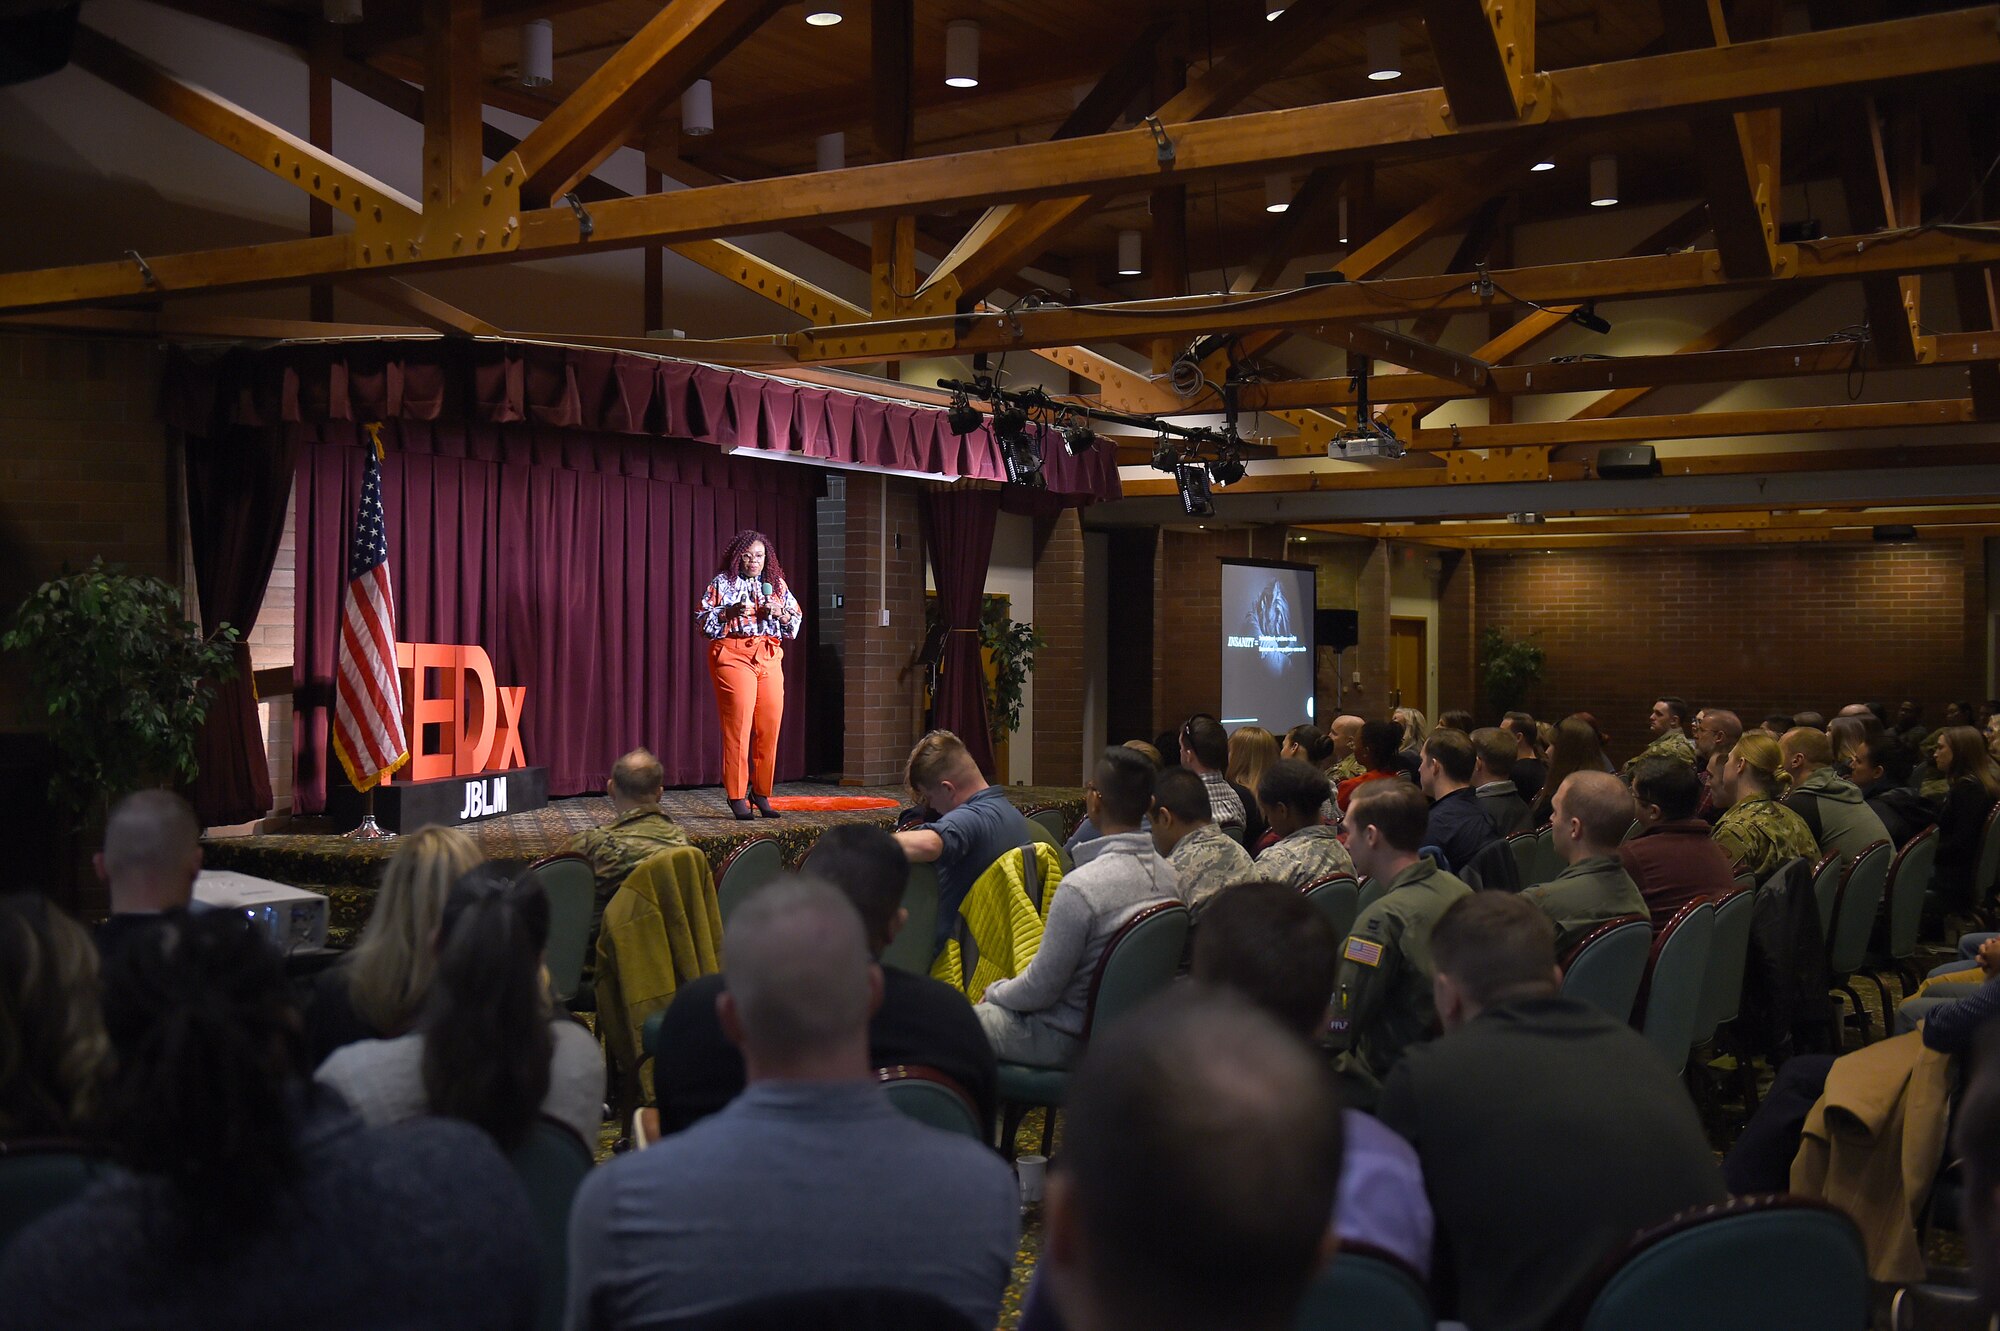 Shellie Willis, CEO and Founder of the “Redefining You” Foundation, speaks at the TEDxJBLM event on Joint Base Lewis-McChord, Wash., November 1, 2019. In her presentation, Willis talked about how people often find themselves utilizing their skills and abilities in a limited way and how to bring their talents and skills into their workplace and community.